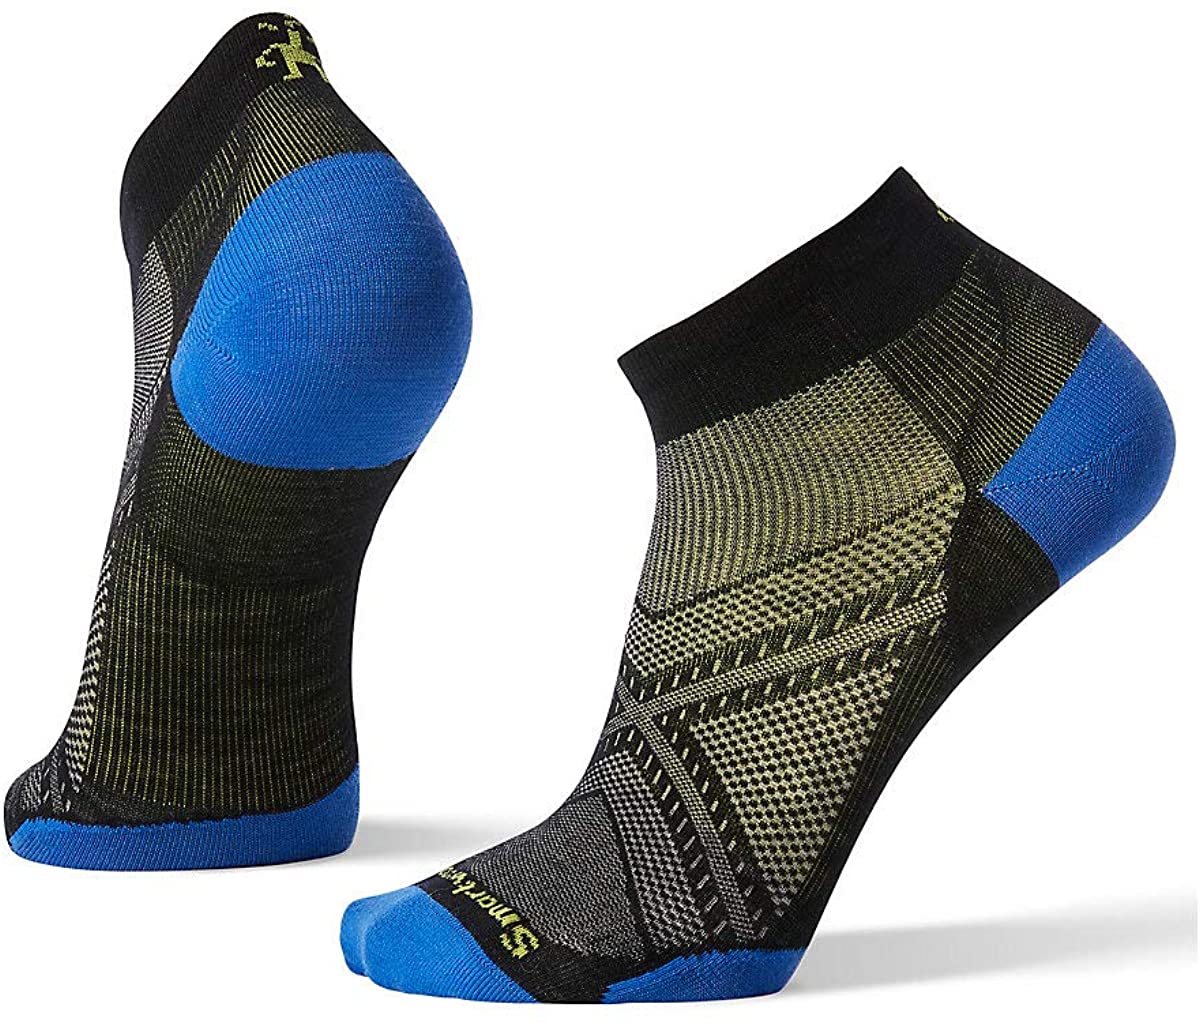 Unisex Smartwool PhD Run Ultra Light Low Cut Socks in Black from the front view